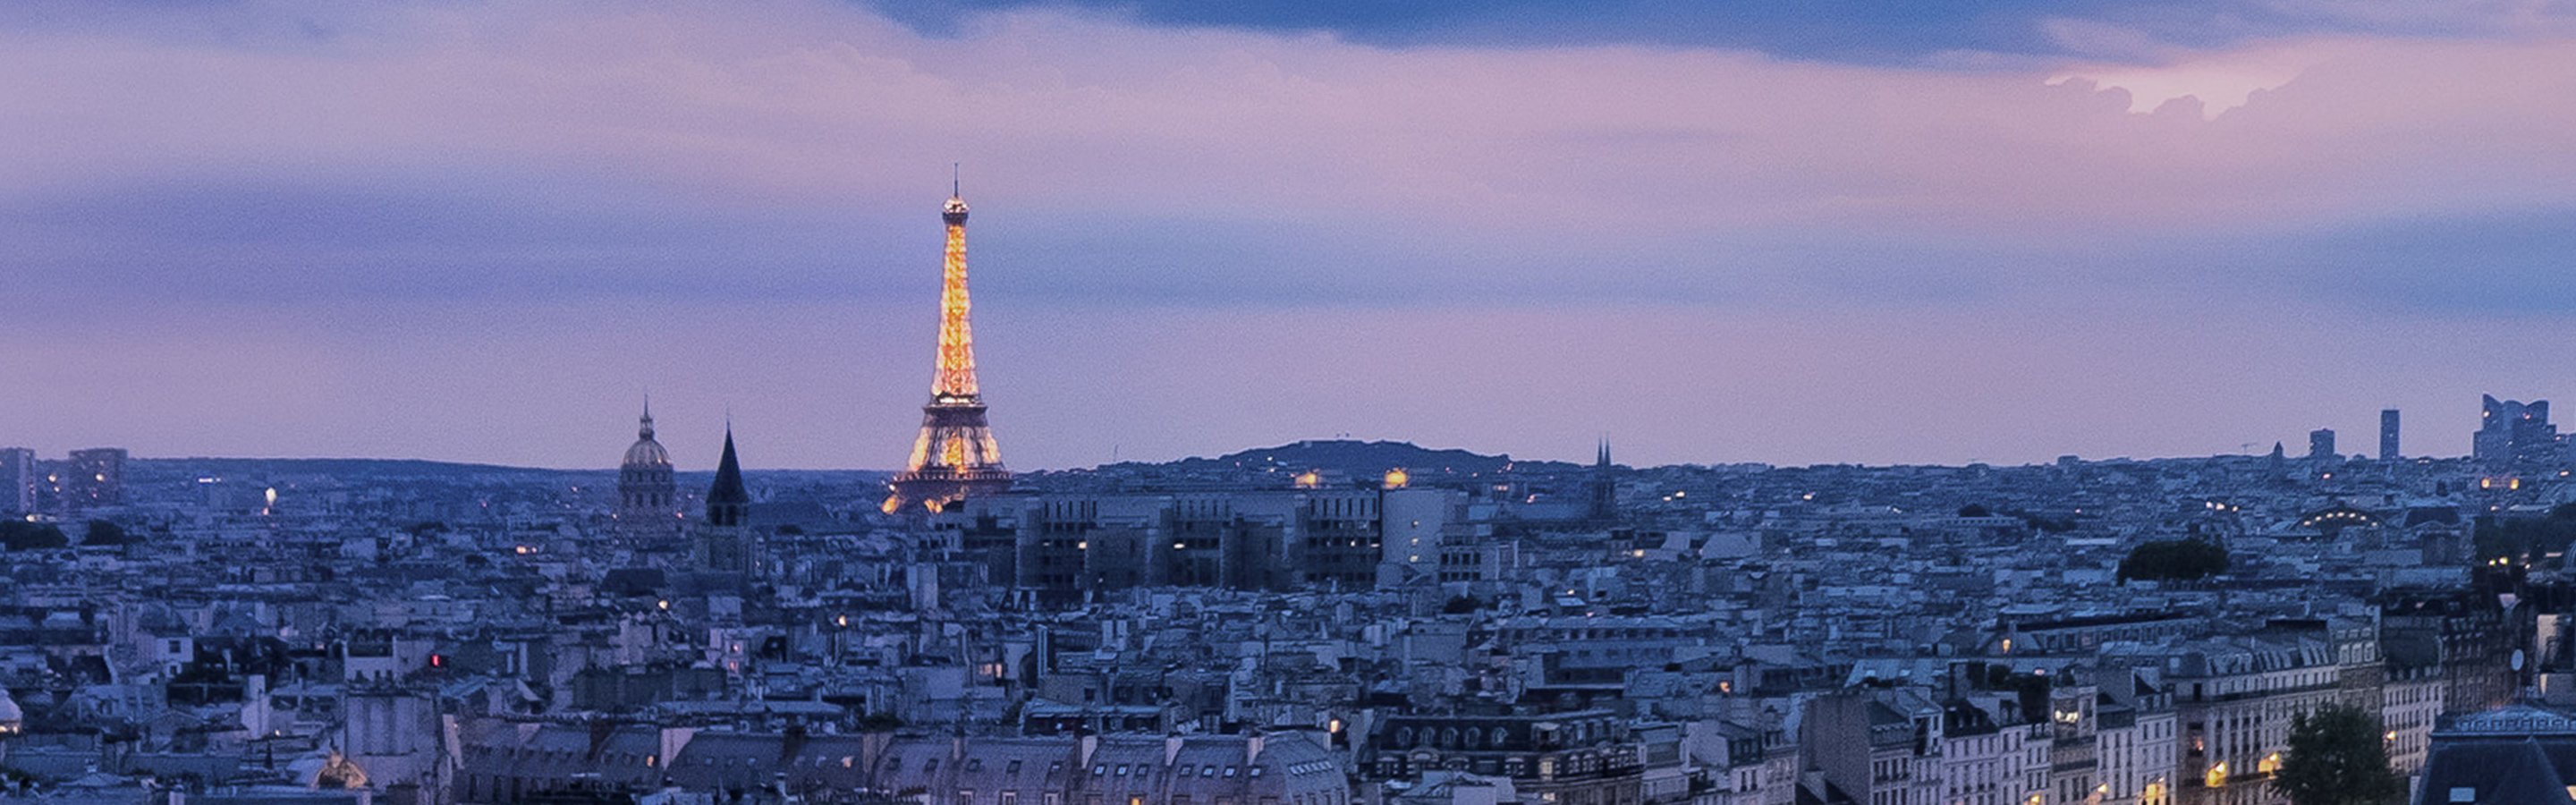 The Paris skyline with the Eiffel Tower lit up.